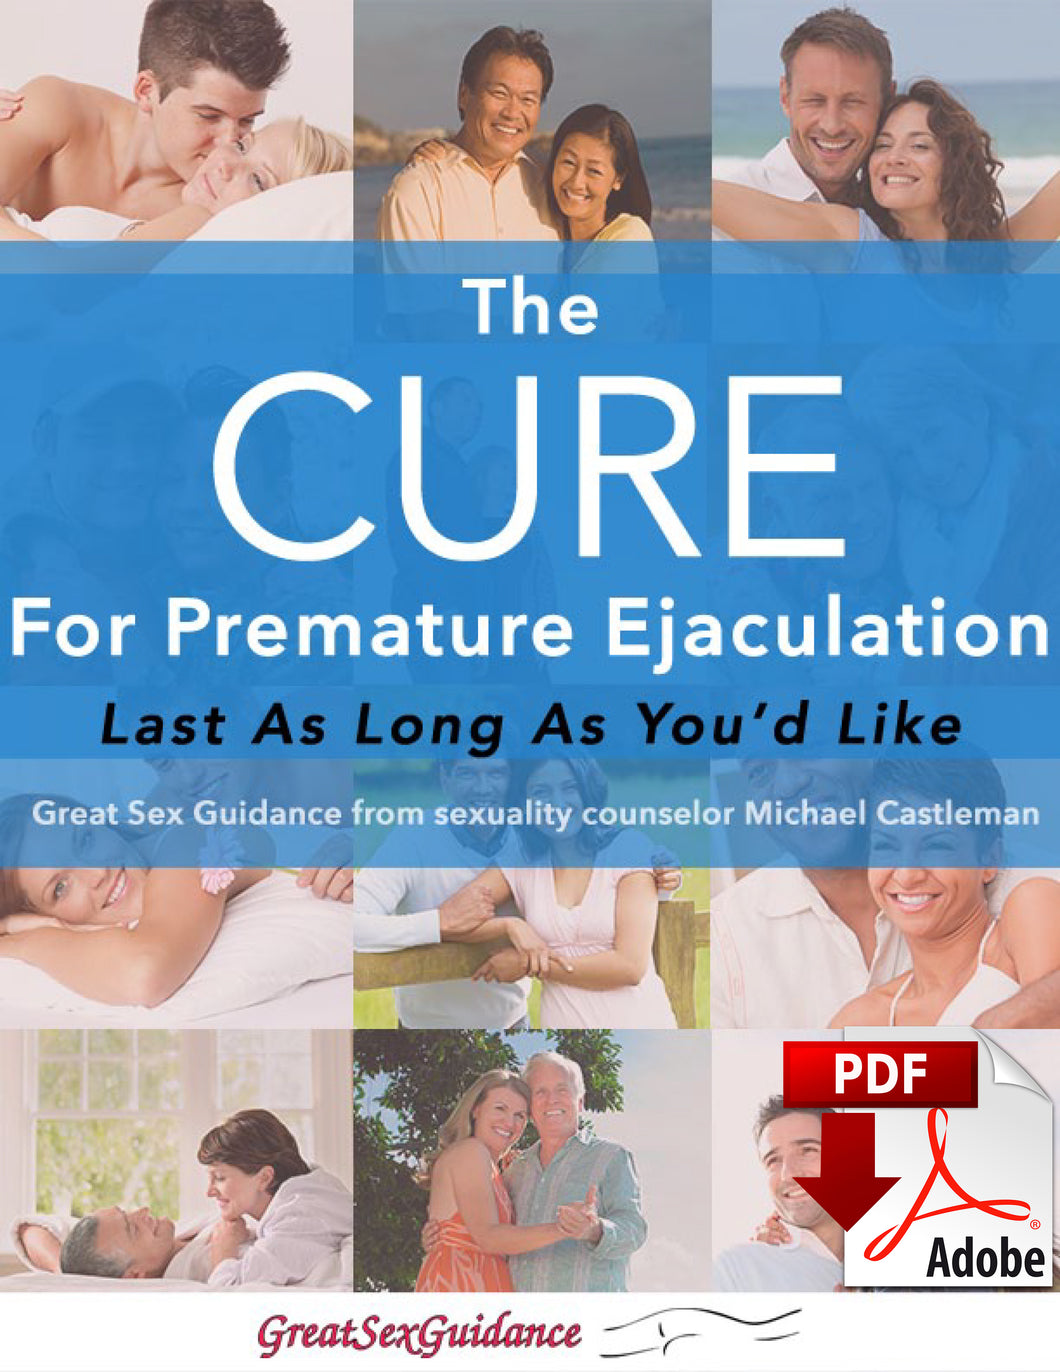 The Cure for Premature Ejaculation (PDF)